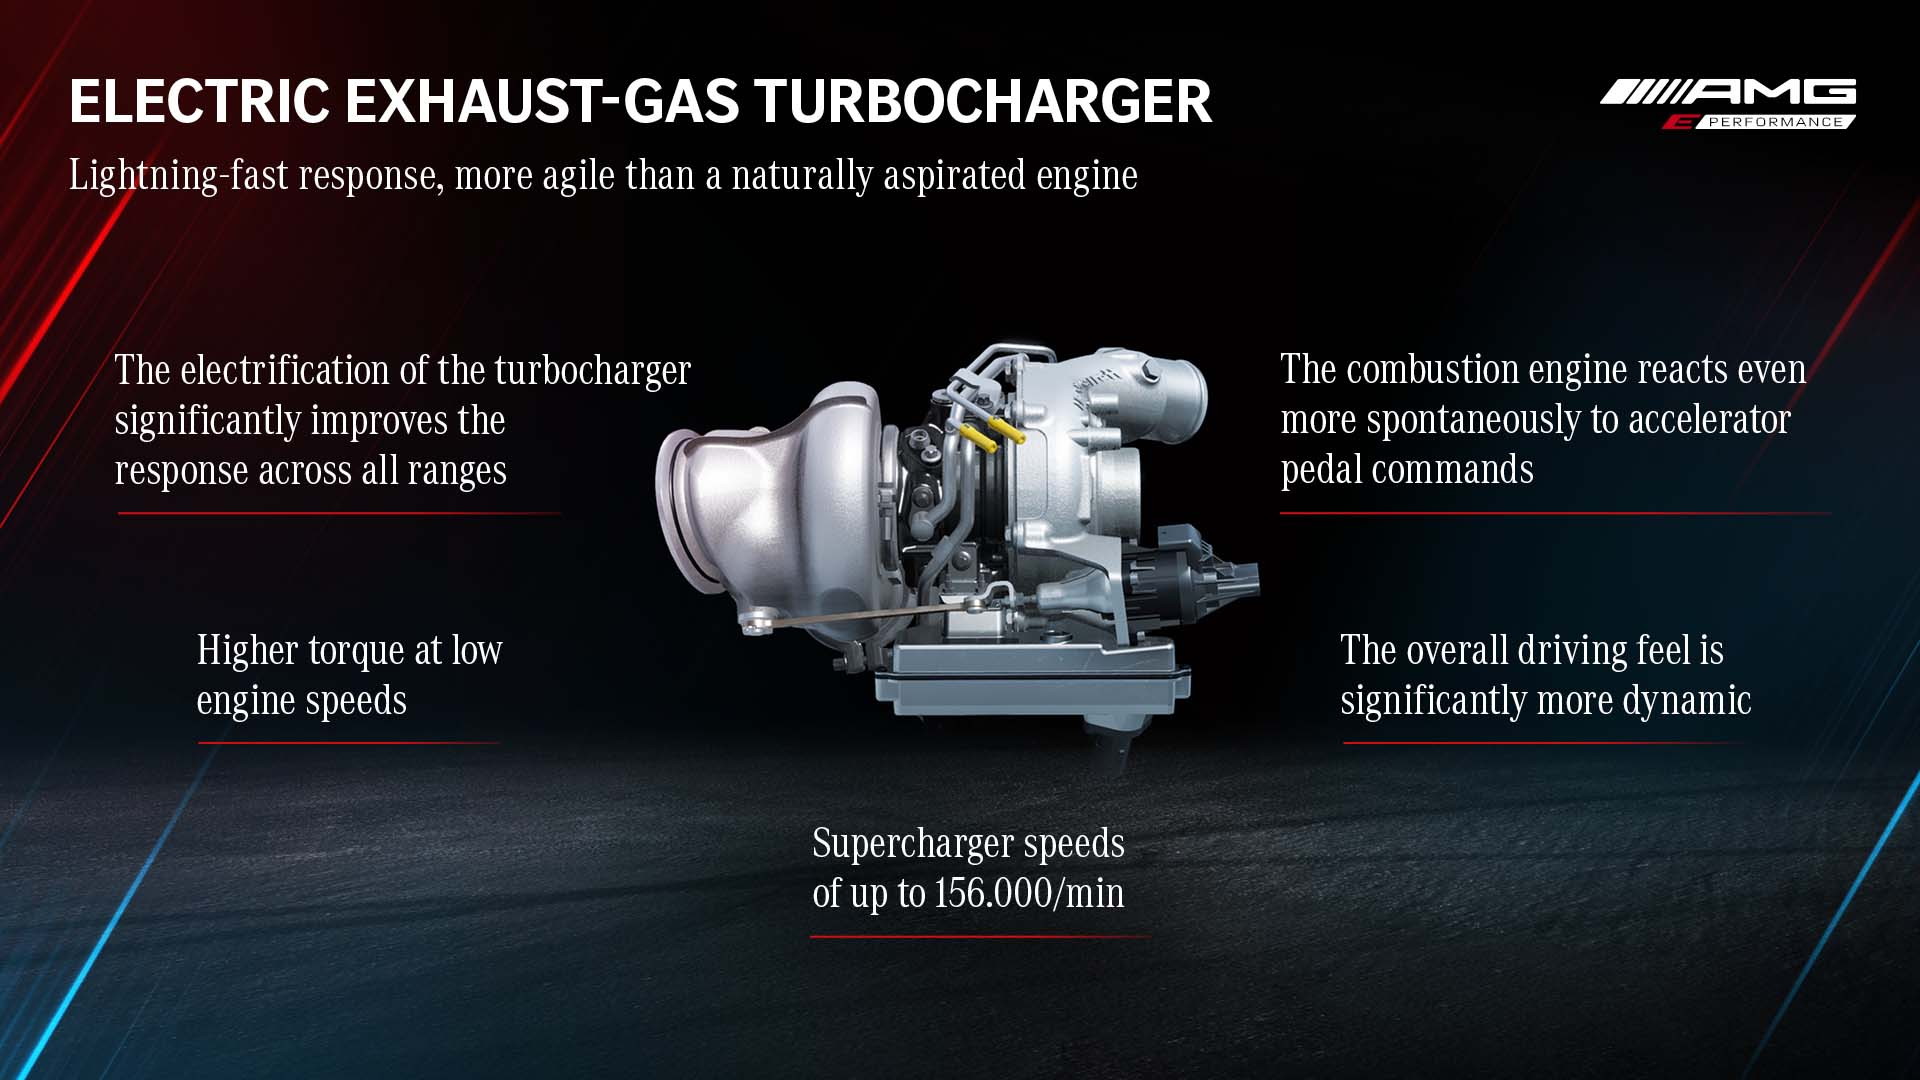 Mercedes-AMG E Performance electric exhaust-gas turbocharger